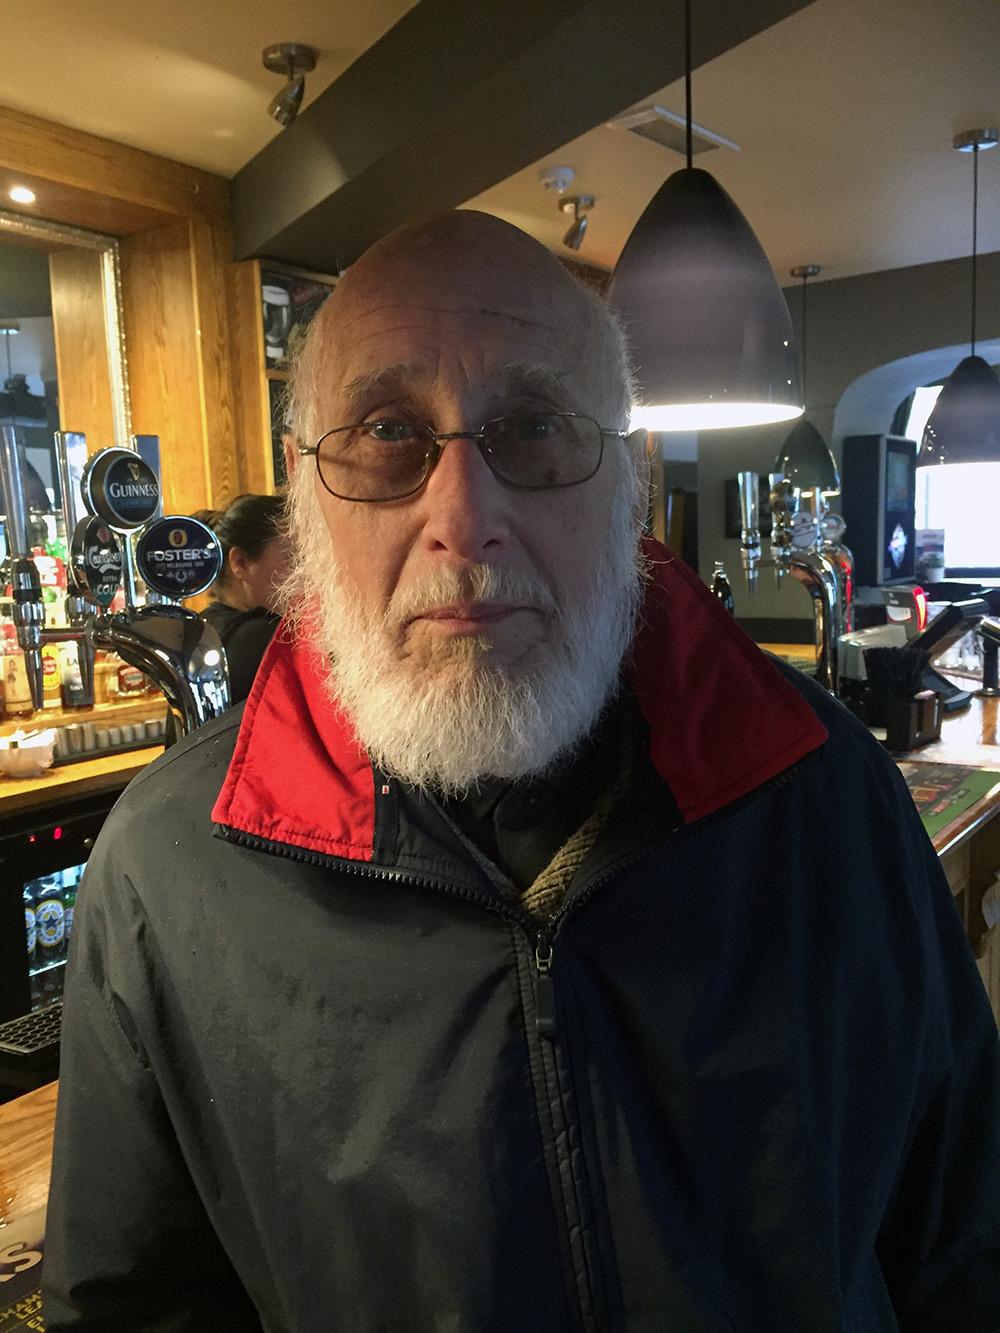 Mike Hudnott, 73, retired, from Chandlers Ford, said: "Fifa is a set up. They should stay out of it it's none of their business."